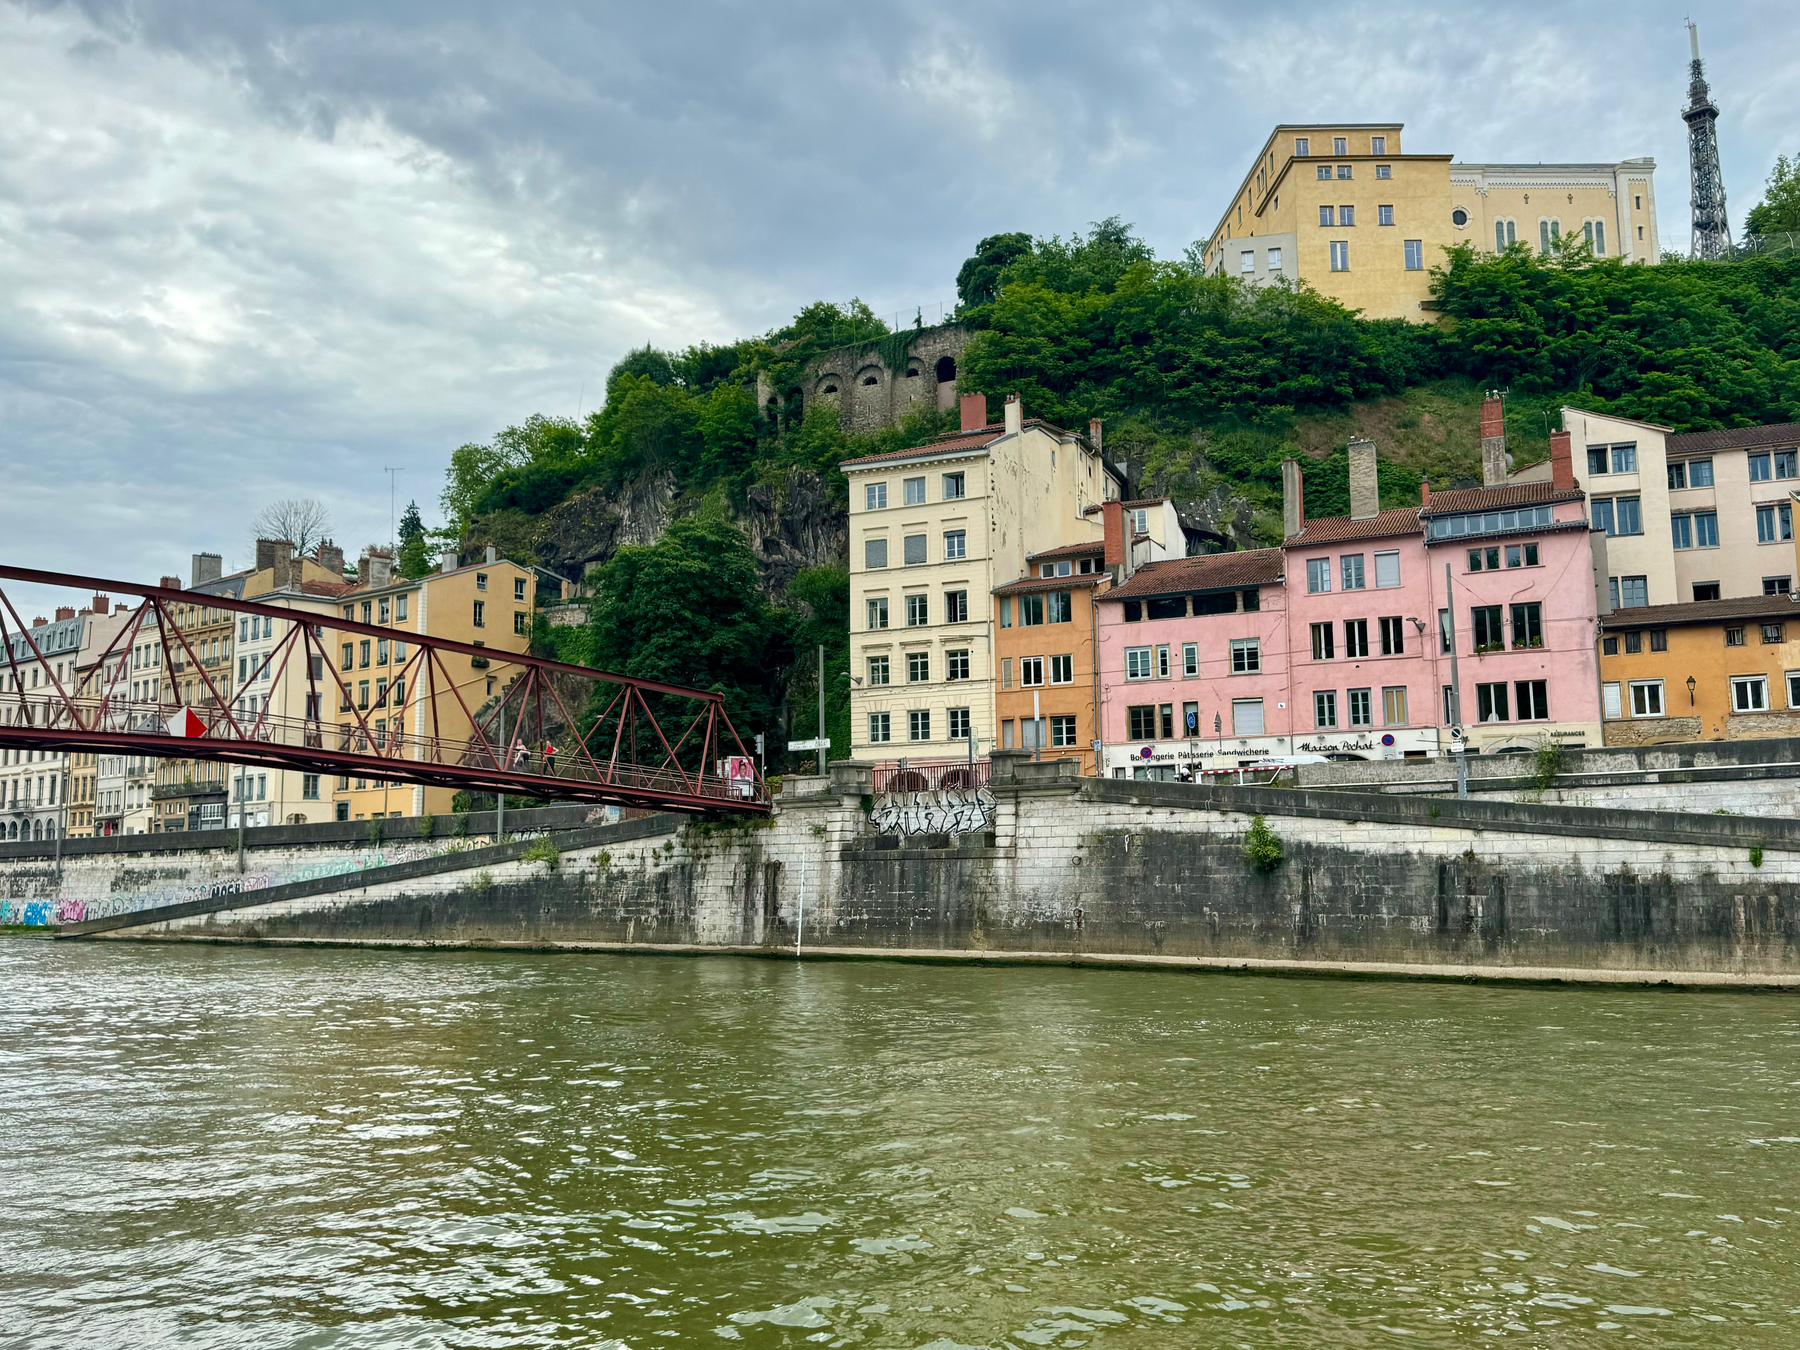 A river in the foreground with a pedestrian bridge to the left. Colorful buildings line the riverbank, backed by a hill with greenery and a large building on top. A tower is visible behind the hill.